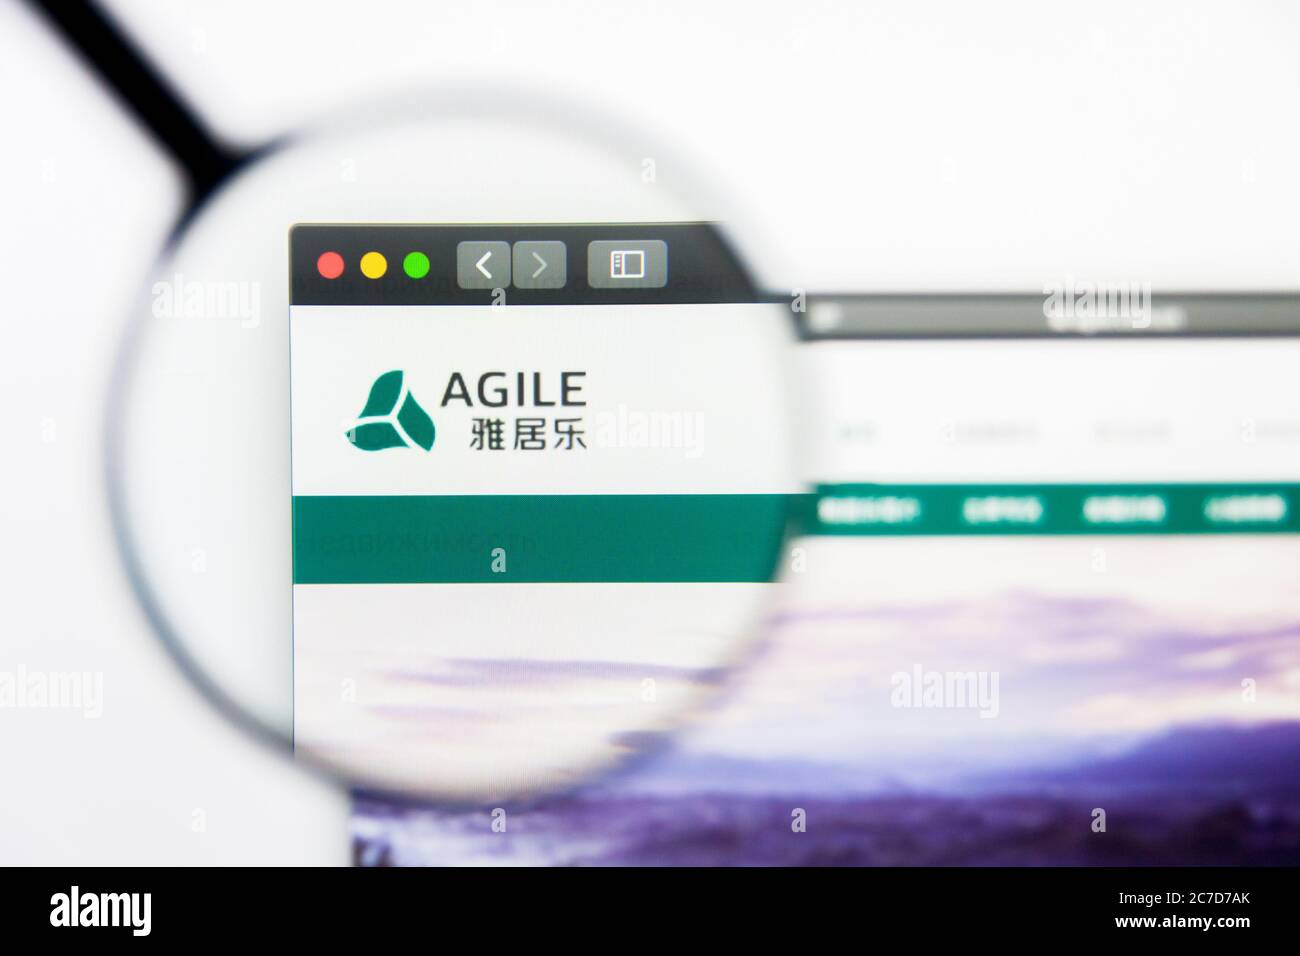 Los Angeles, California, USA - 25 March 2019: Illustrative Editorial of Agile Property Holdings website homepage. Agile Property Holdings logo visible Stock Photo